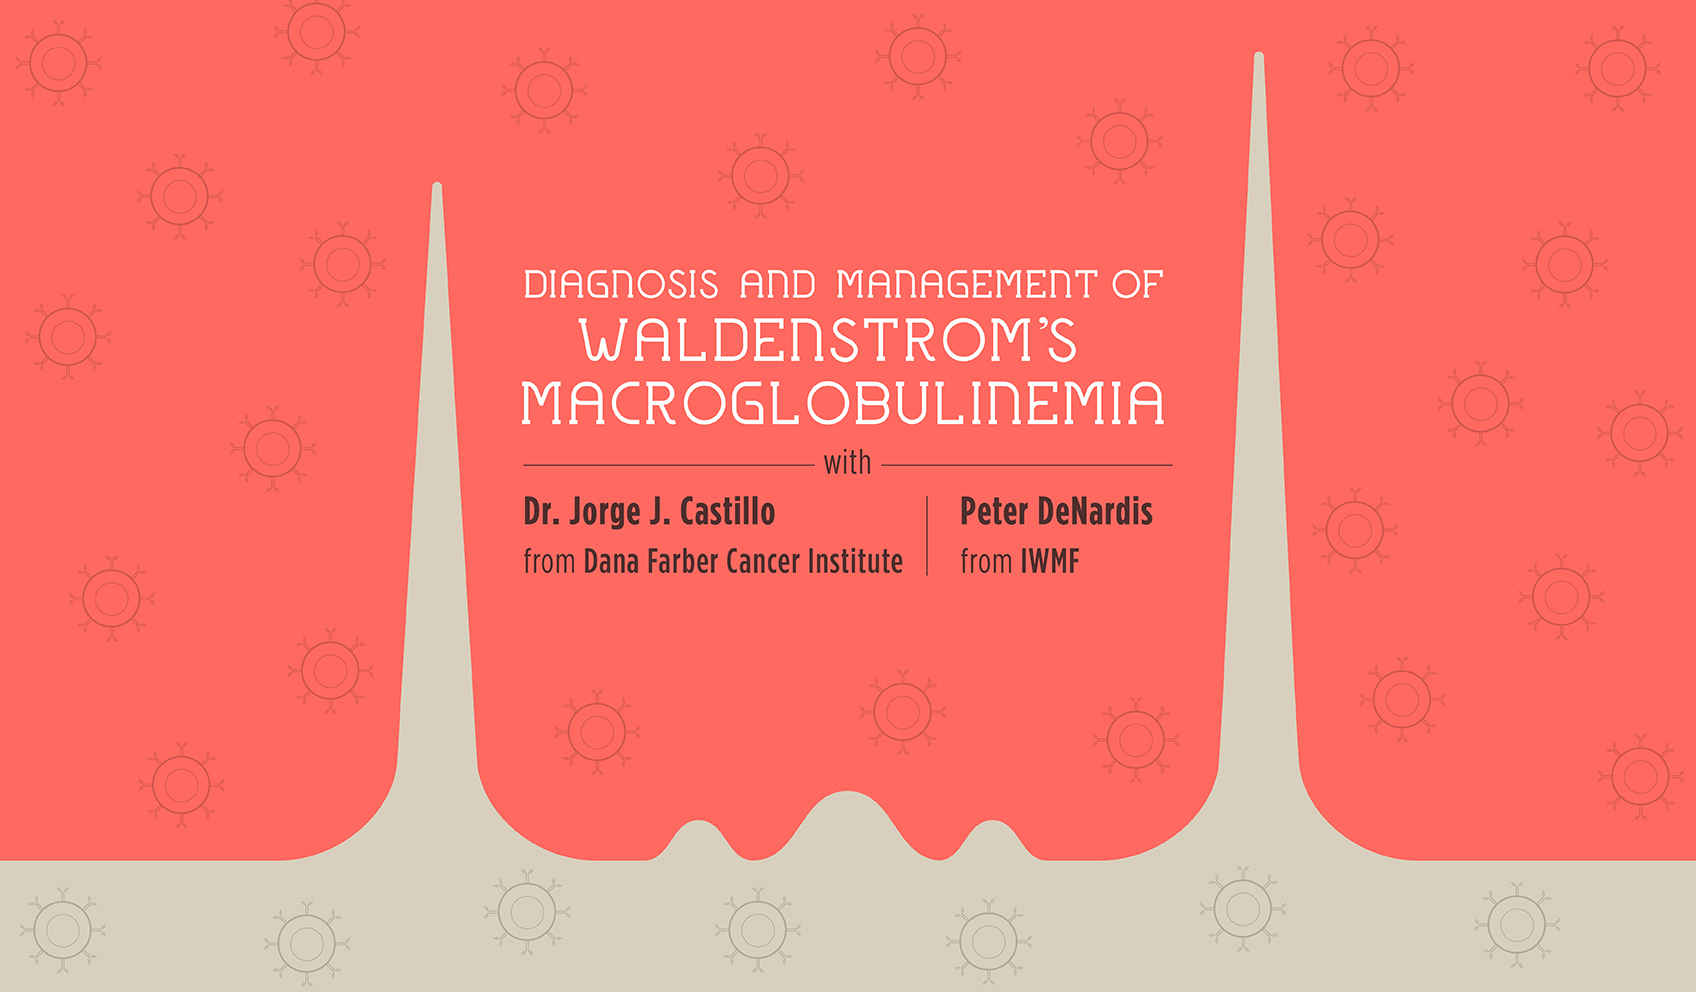 Diagnosis and Management of Waldenstrom’s Macroglobulinemia